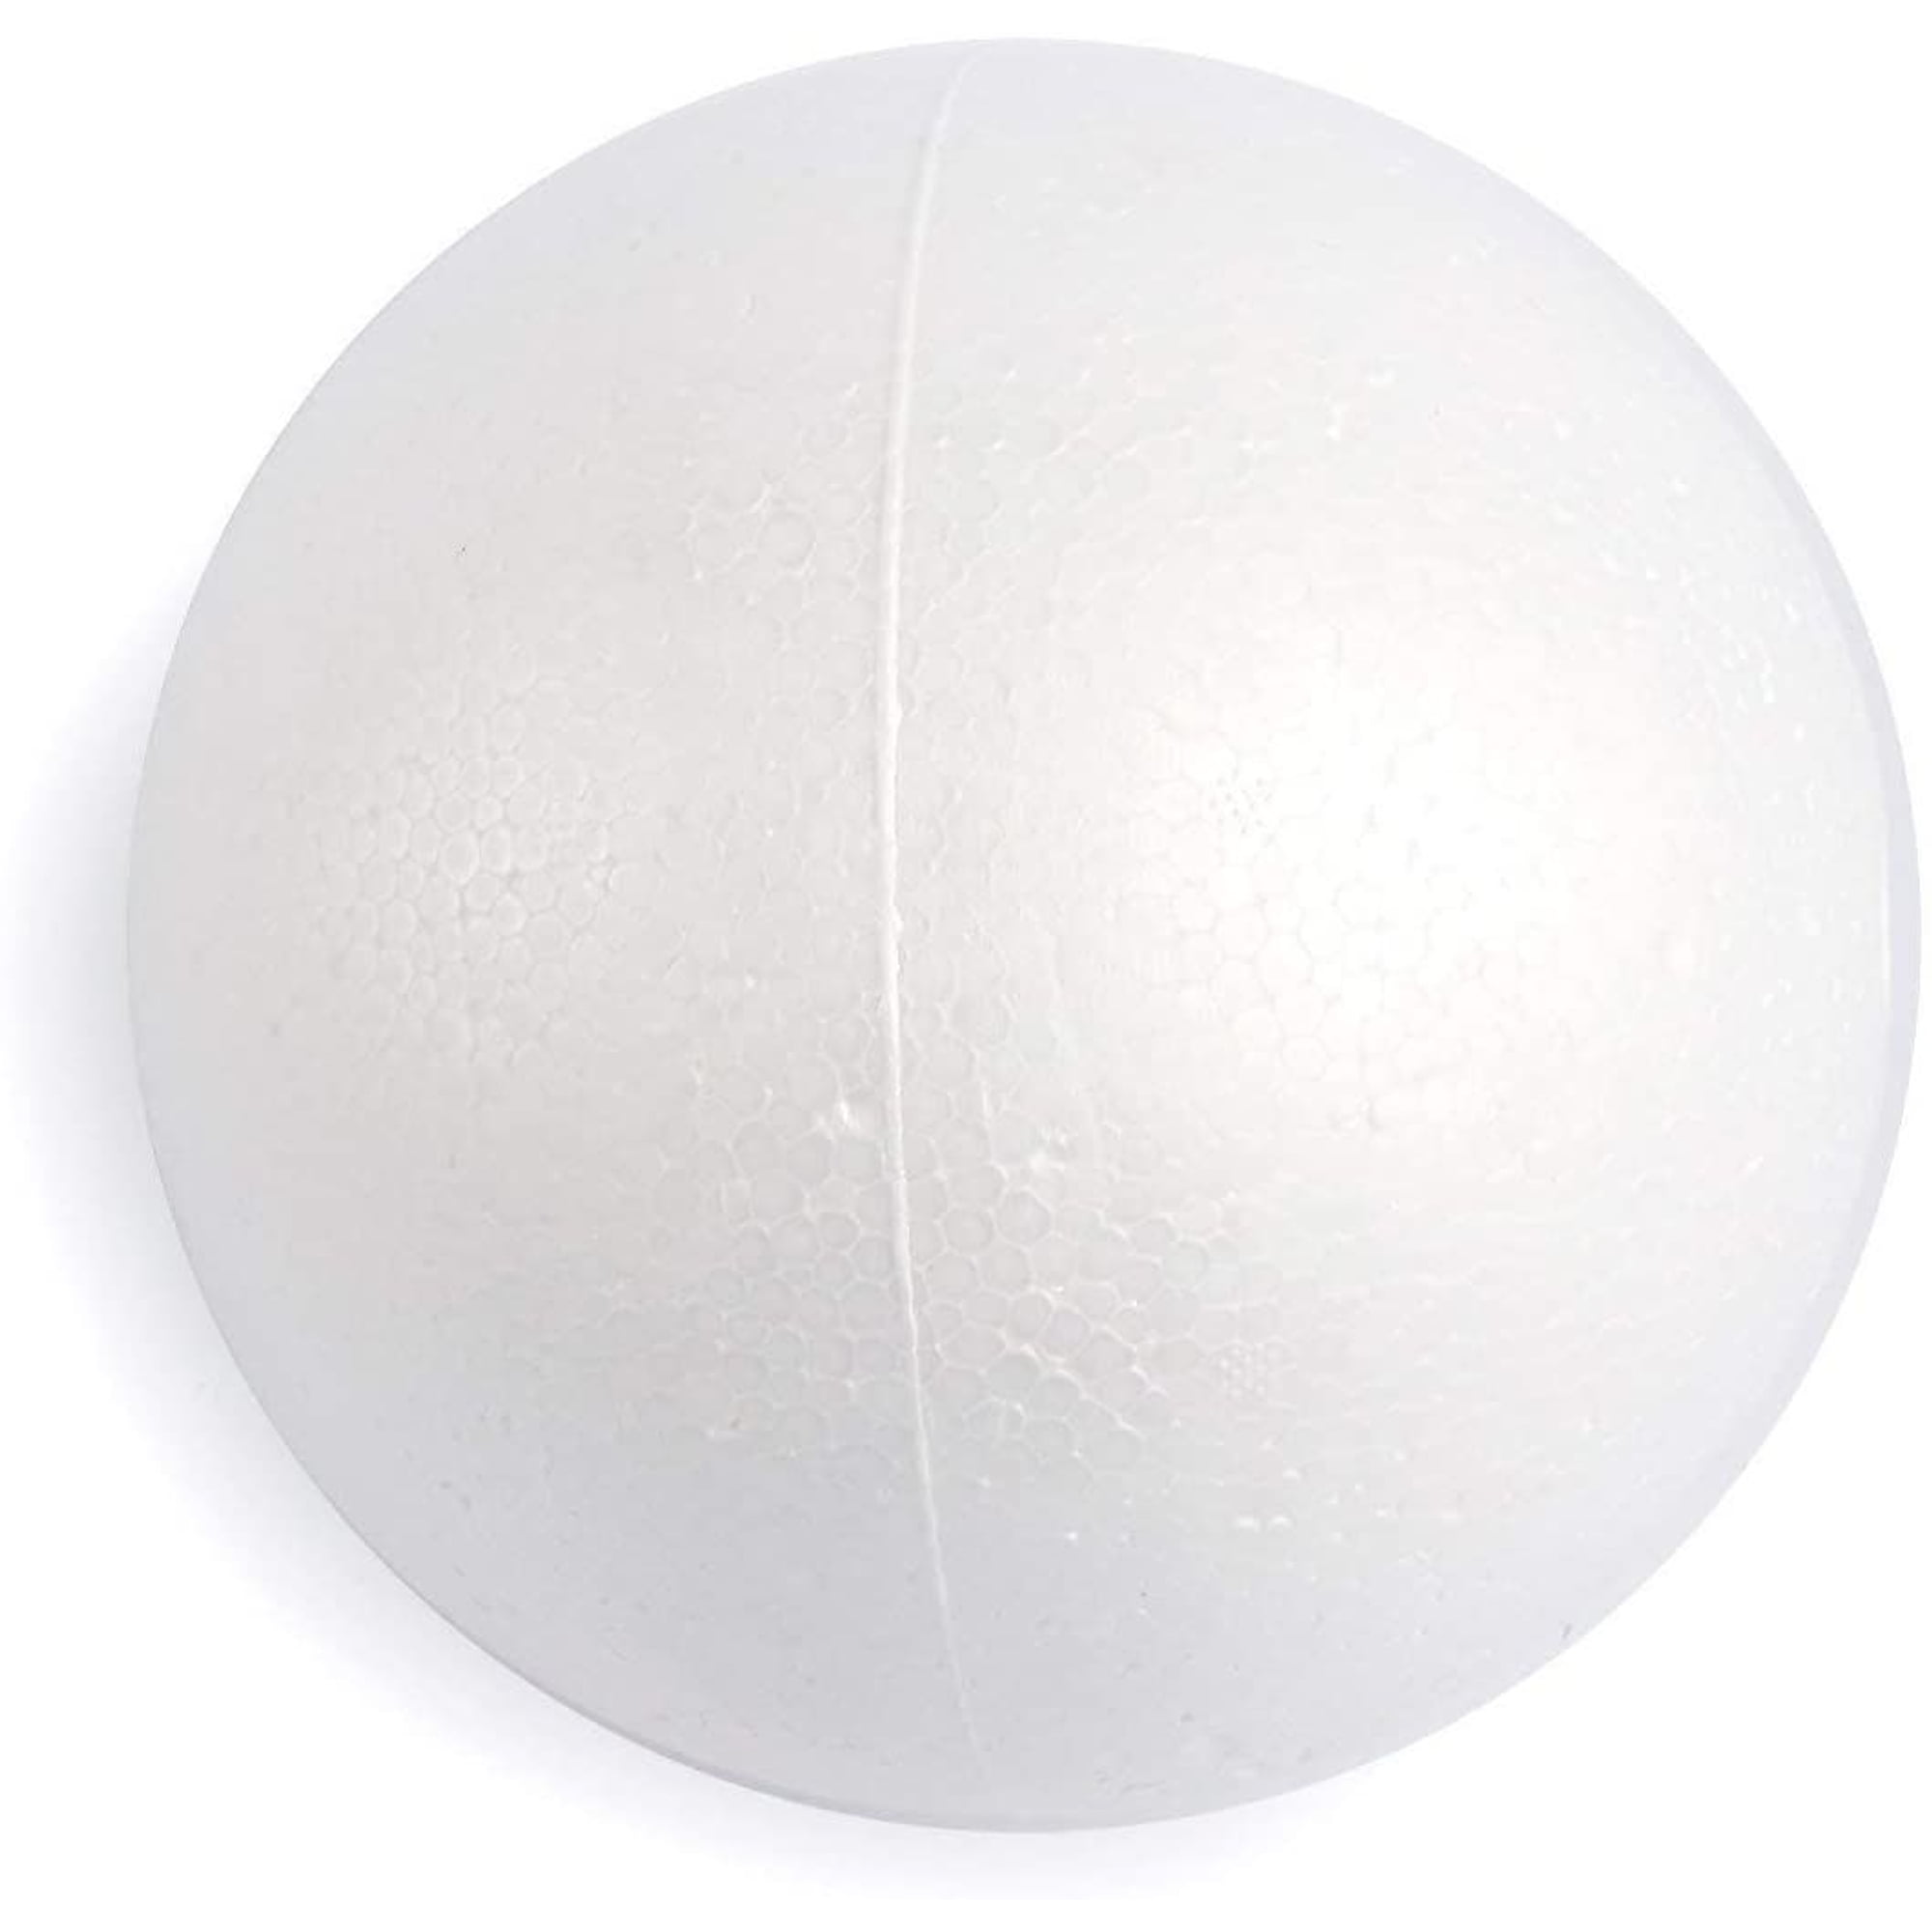 6Pack Craft Foam Balls 4 inch, White Polystyrene Smooth Round Balls, for Arts and Crafts Supplies, School Project, Weddings, Christmas, Home